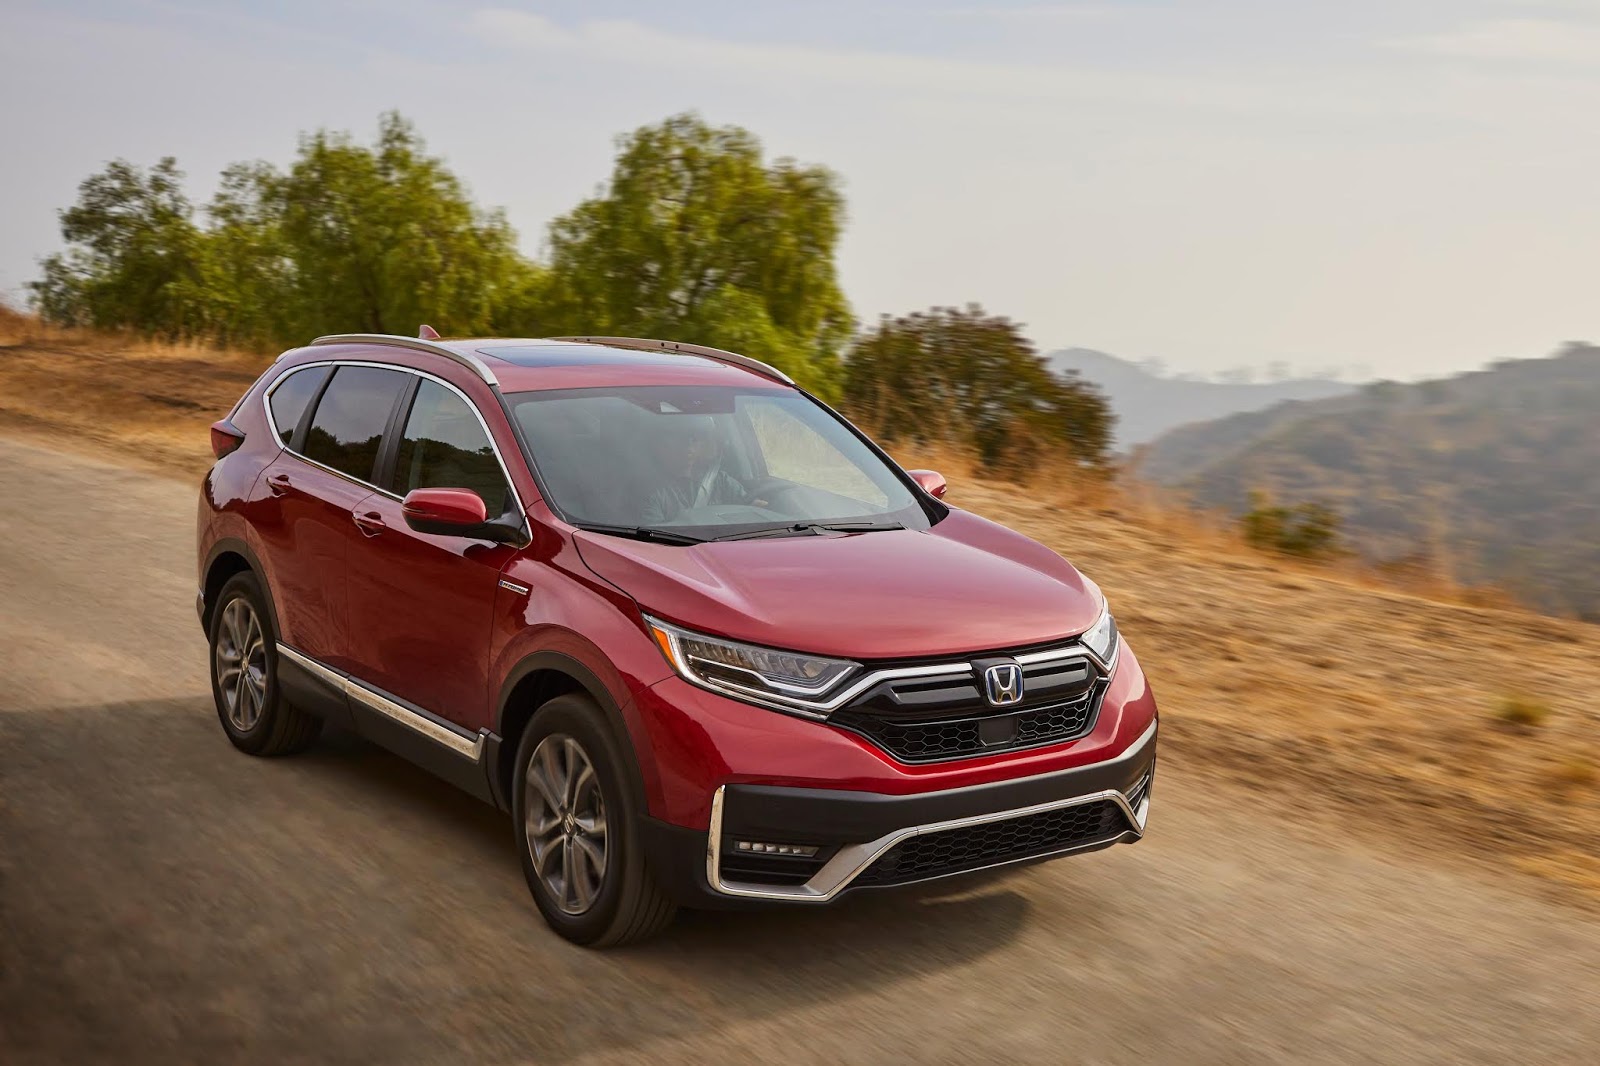 2020 Honda CR-V Hybrid Arriving at Dealerships as the Most Powerful